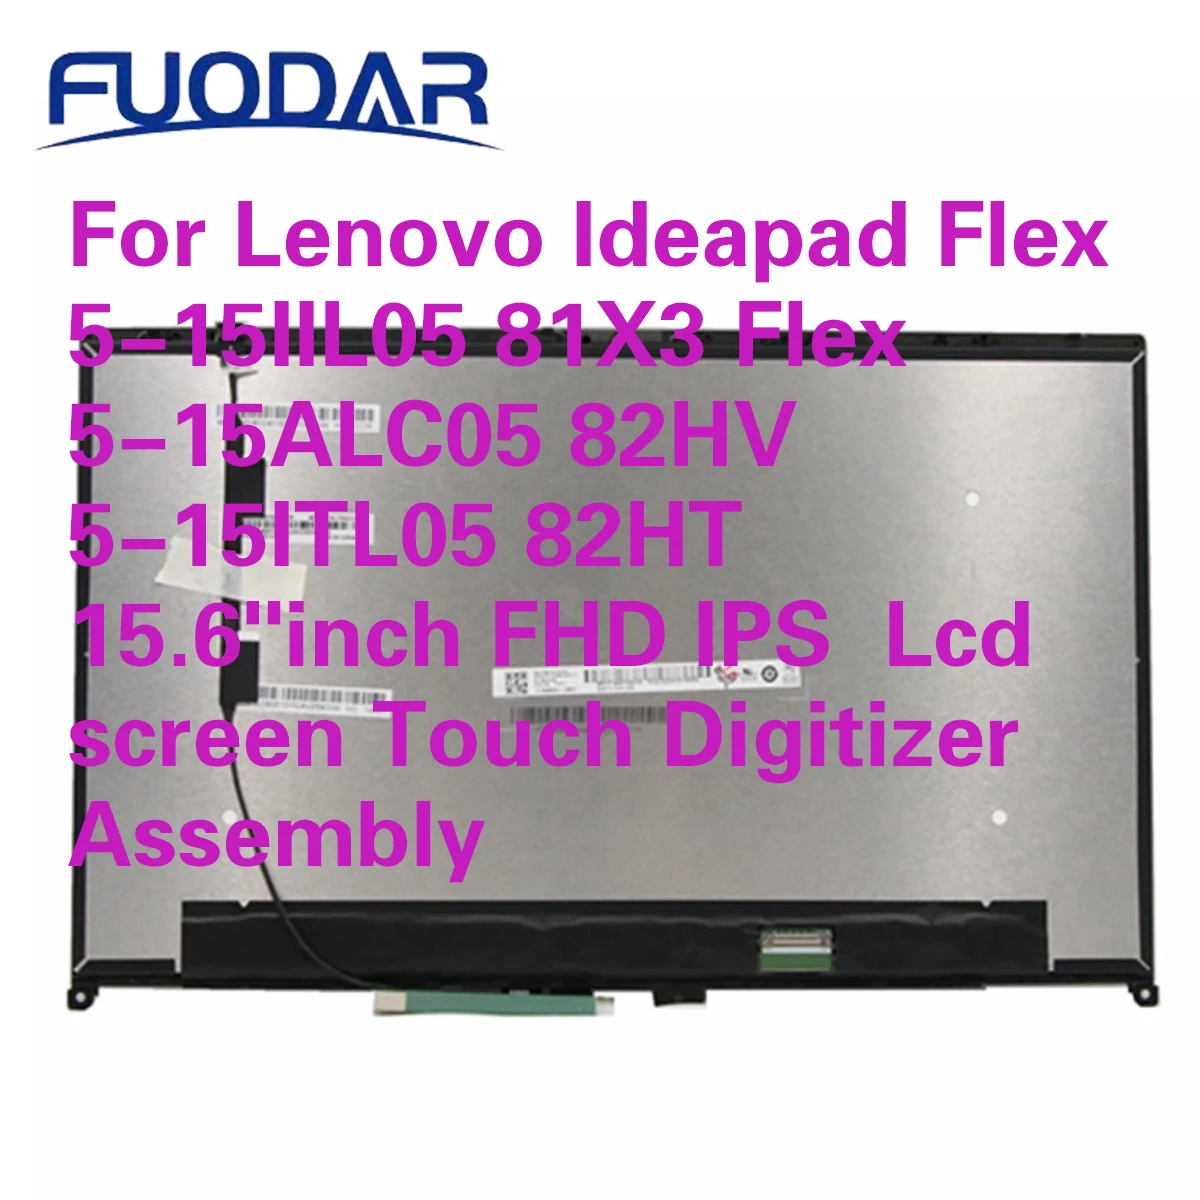 

For Lenovo Ideapad Flex 5-15IIL05 81X3 Flex 5-15ALC05 82HV 5-15ITL05 82HT 15.6"inch FHD IPS Lcd screen Touch Digitizer Assembly